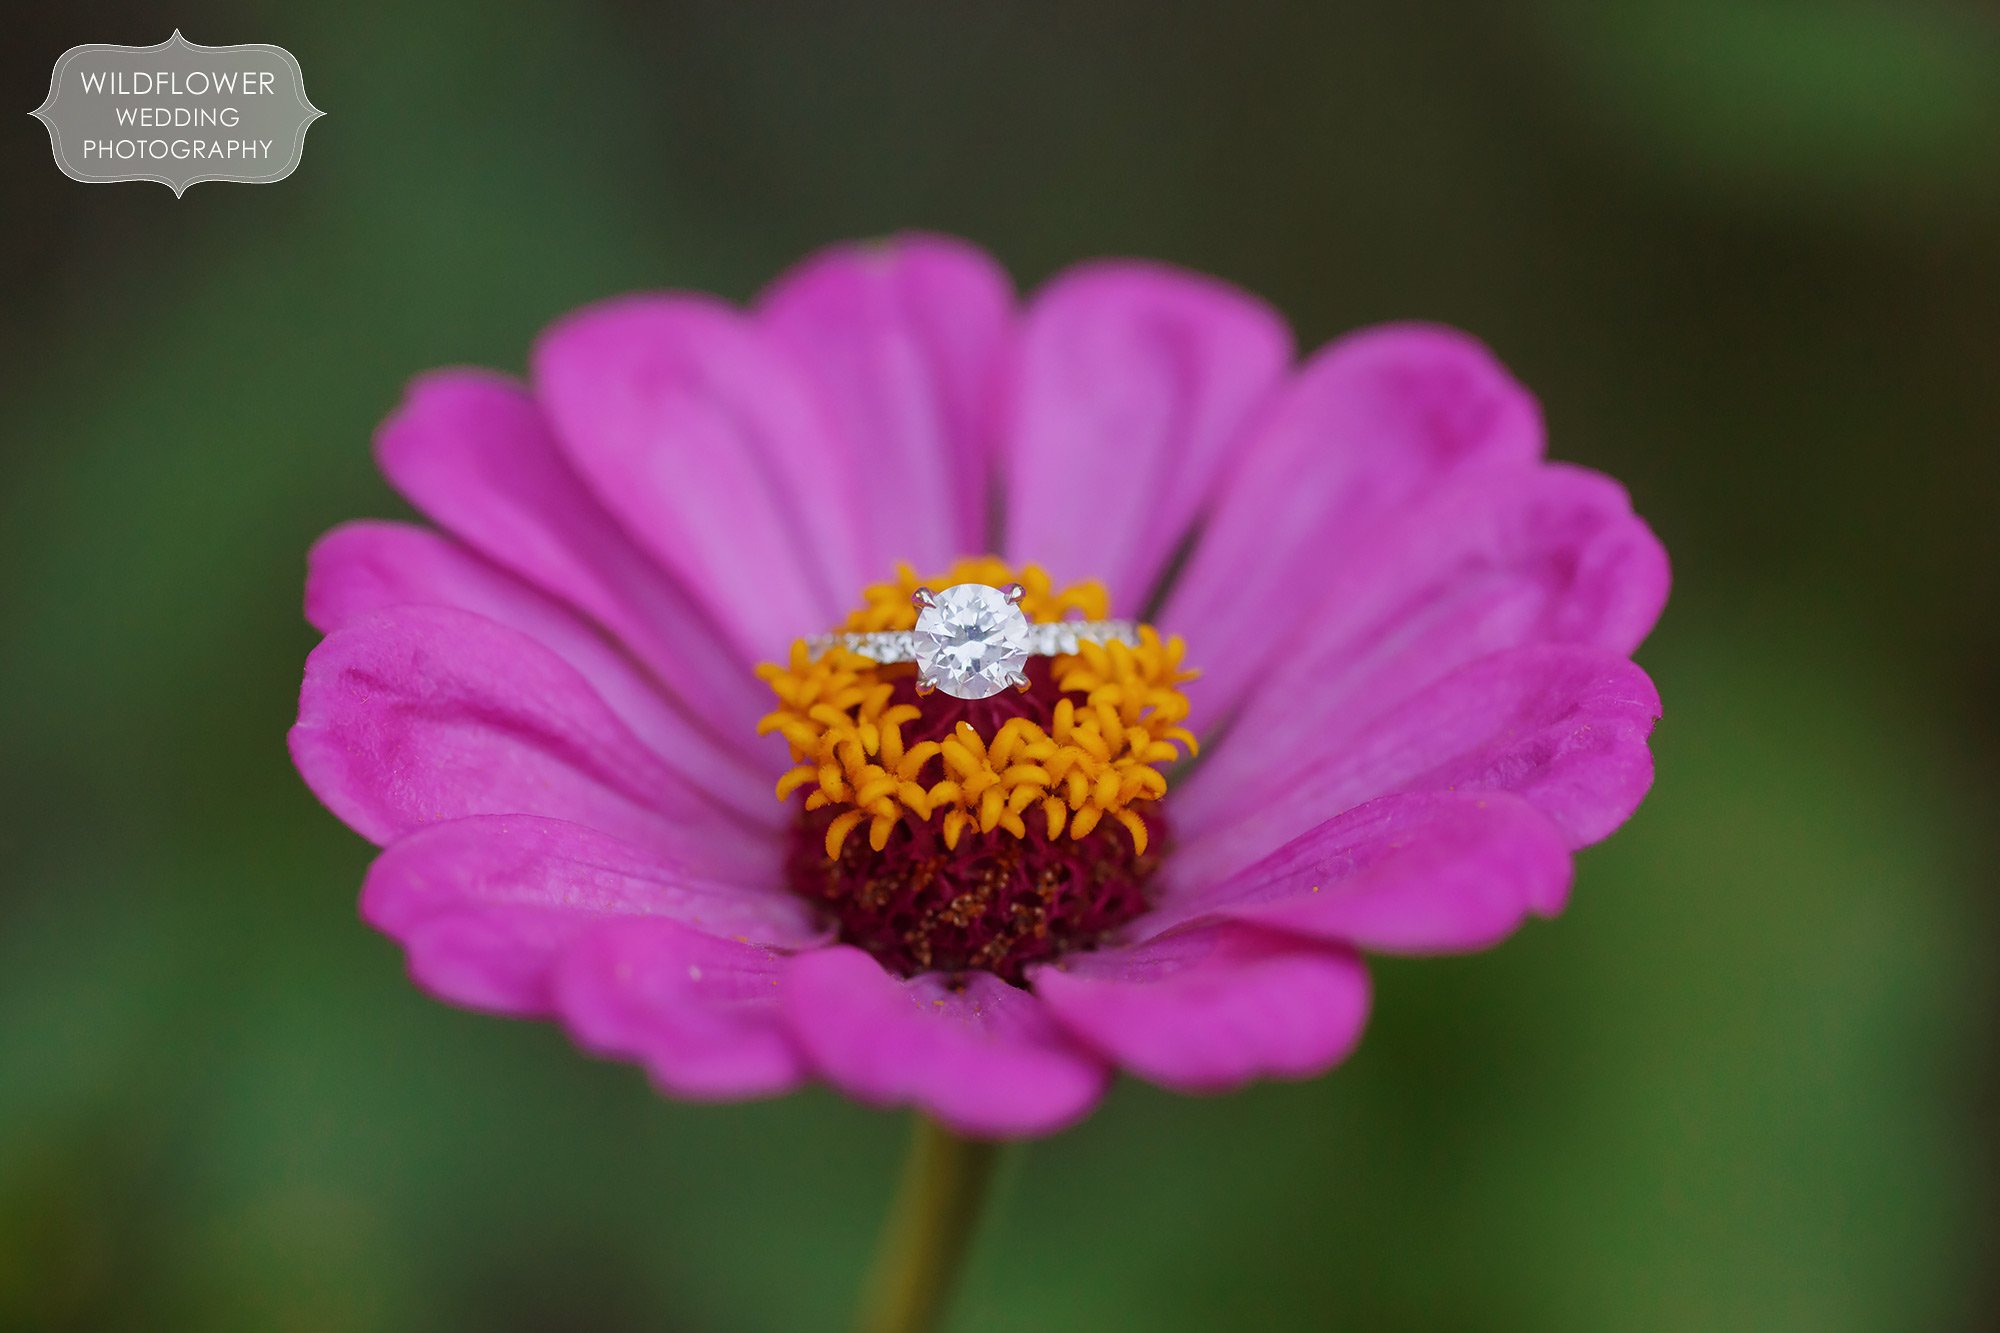 Engagement ring on a bright pink zinnia flower at this backyard wedding in St. Louis.